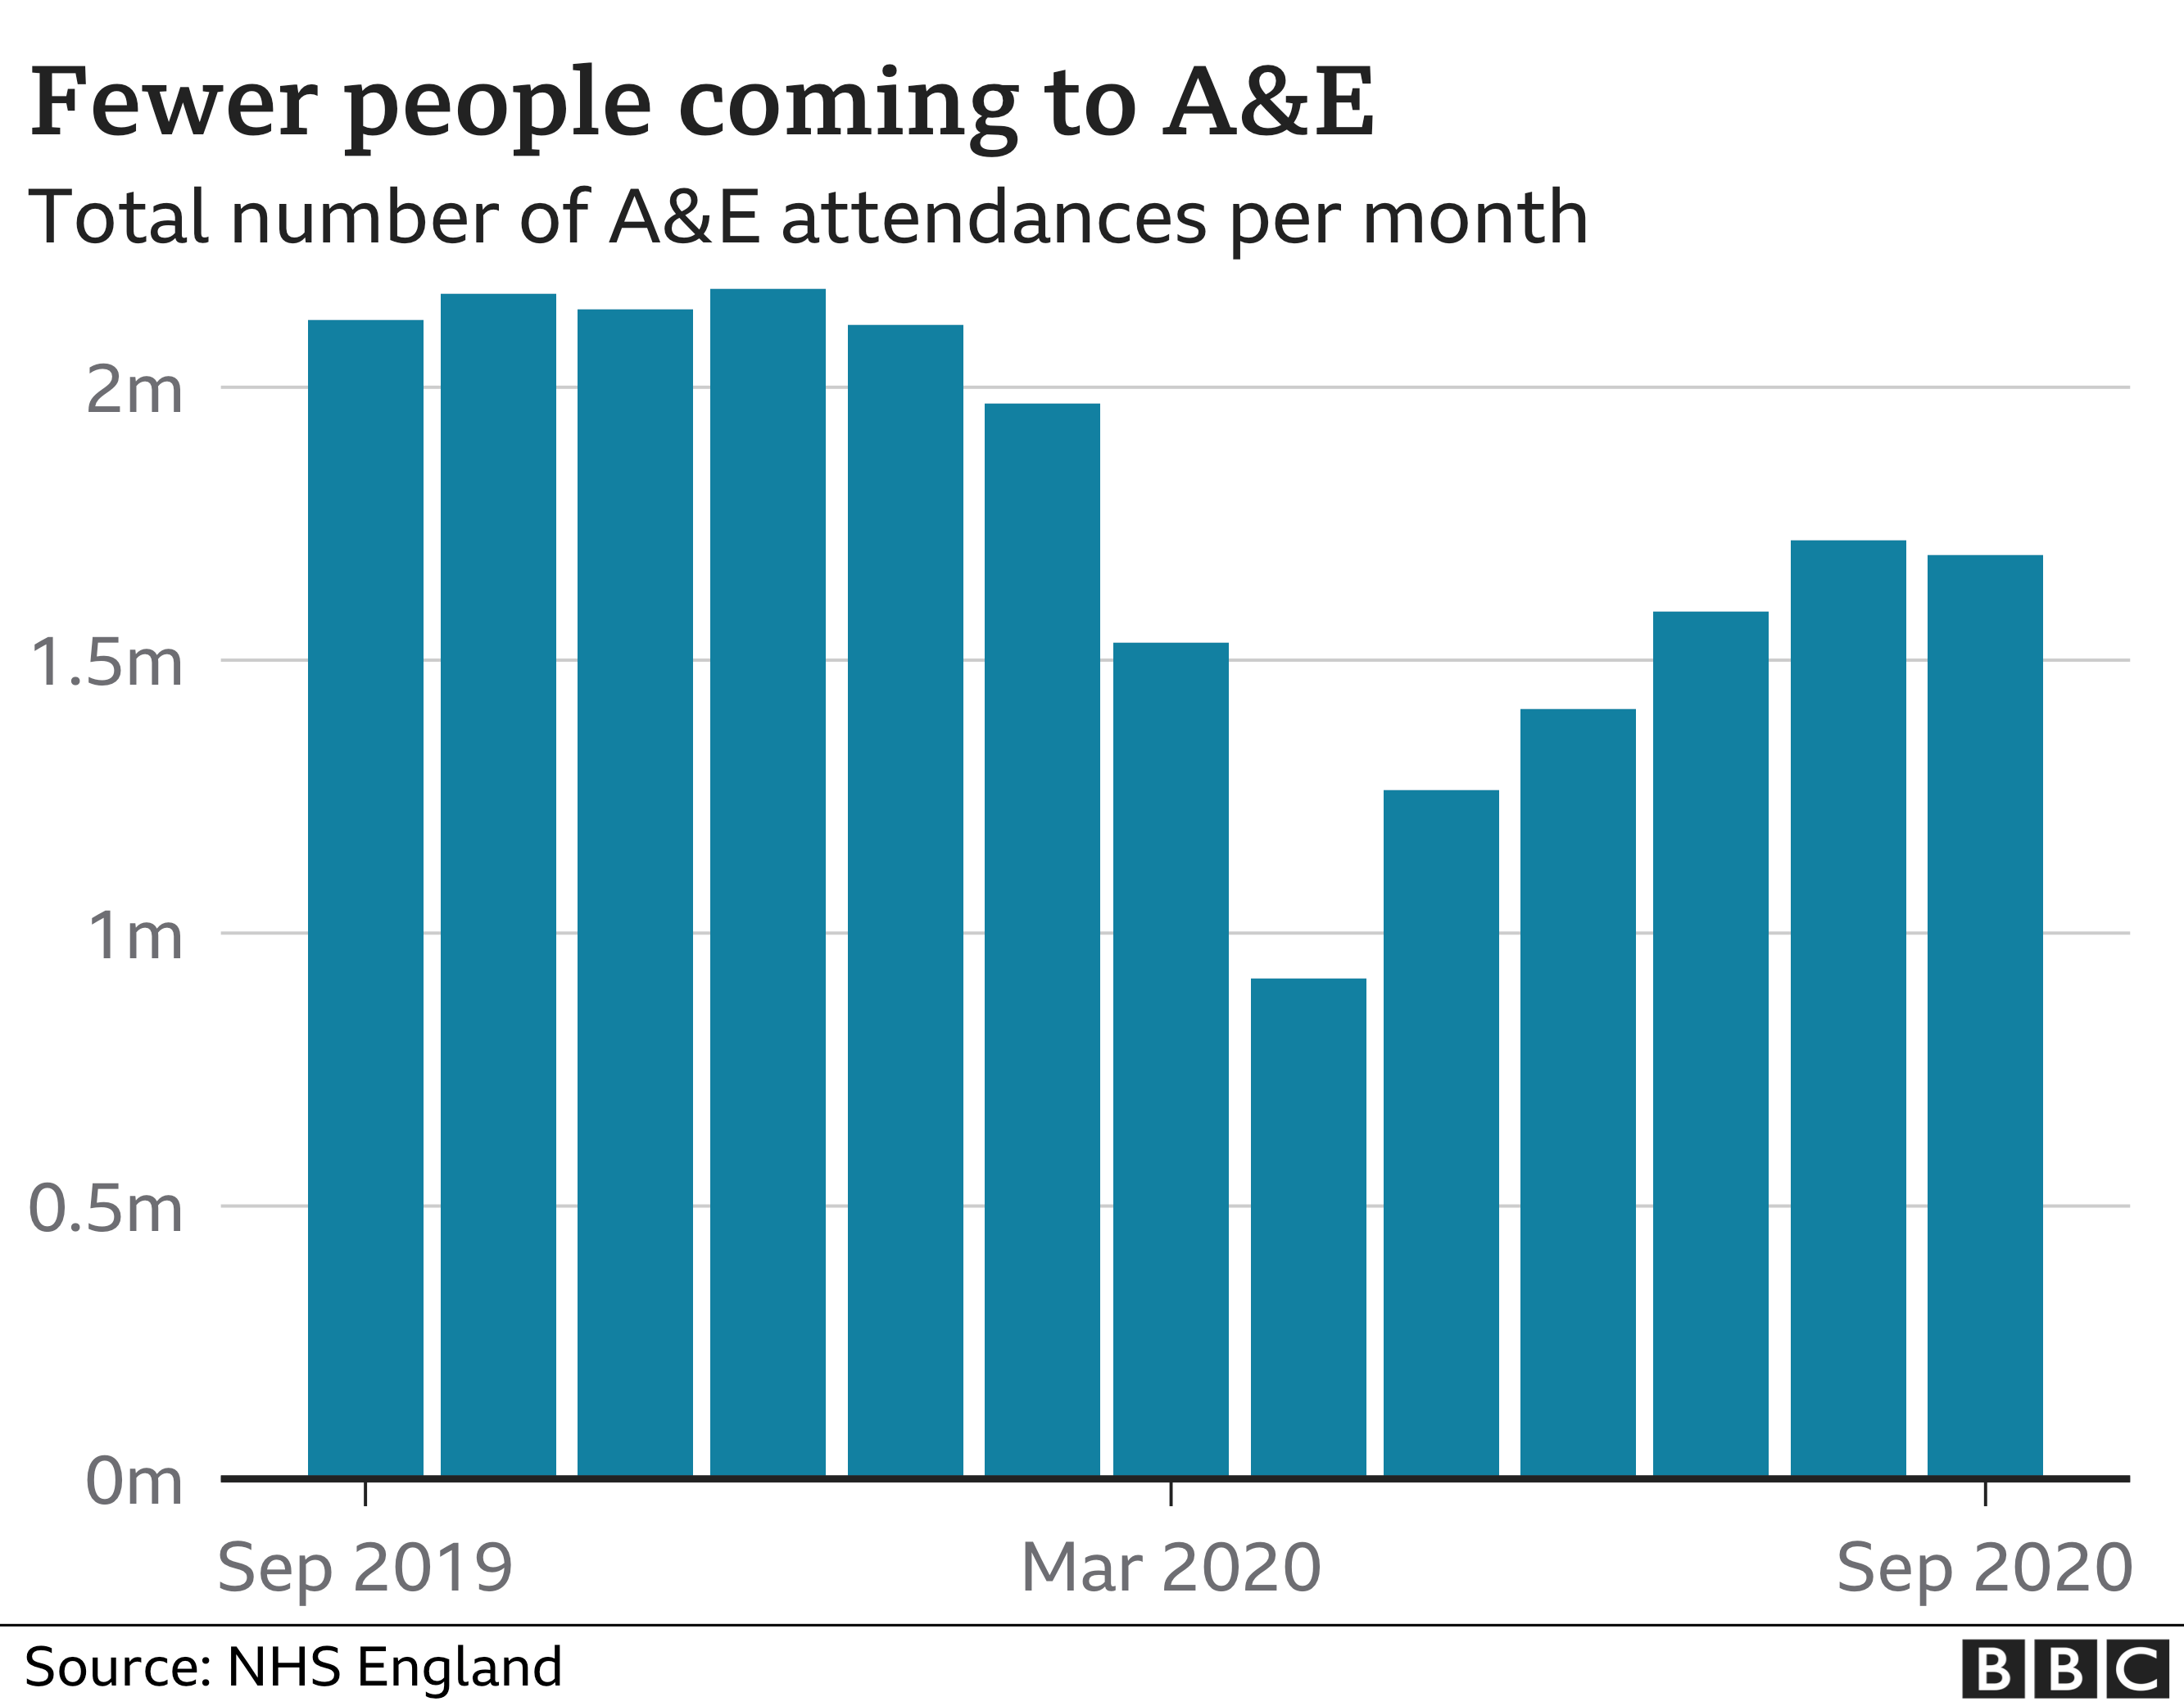 Fewer people coming to A&E